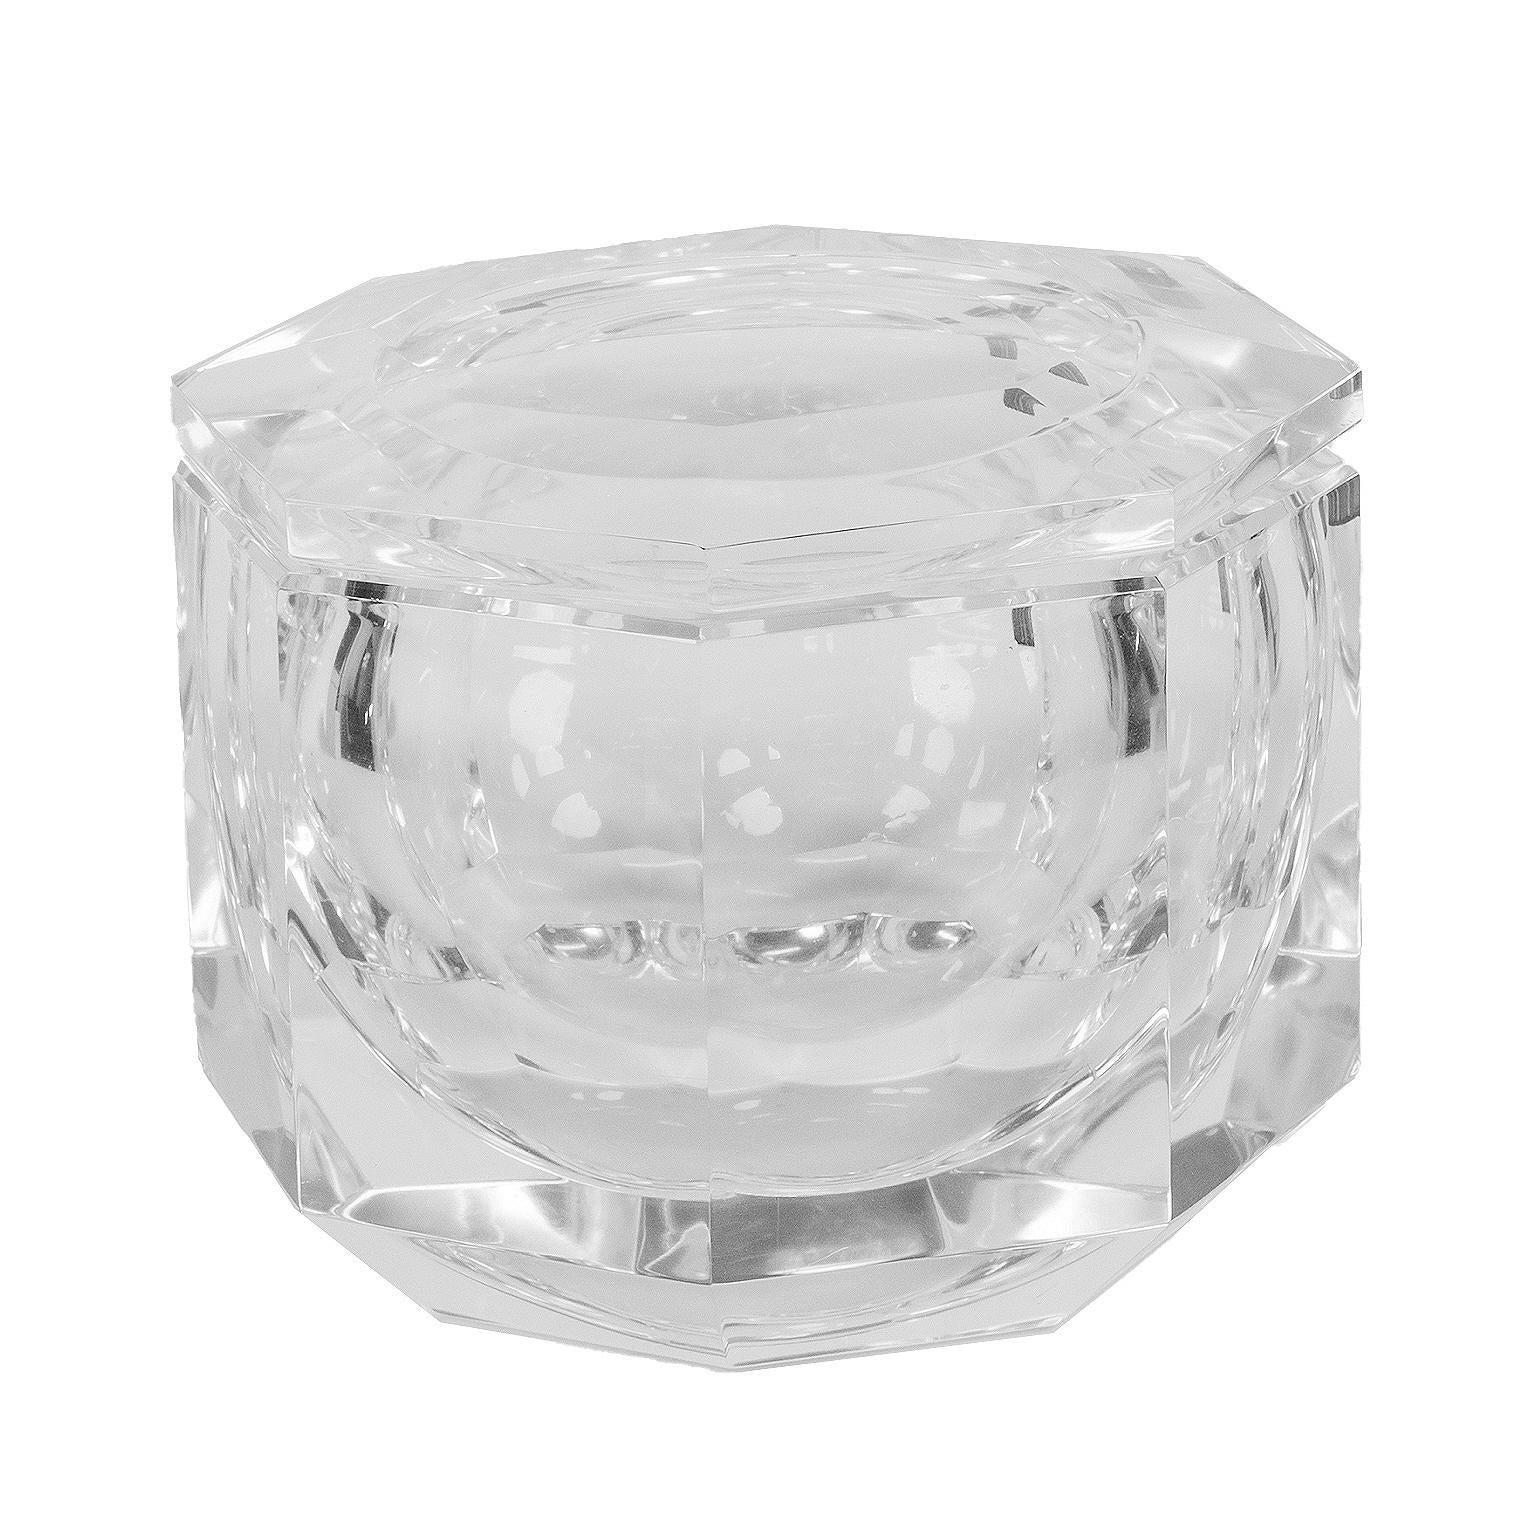 This is a beautiful clean sculpted ice bucket that looks great anywhere you place it. 
Constructed with thick lucite this octagonal  piece has a faceted top that swivels to open. It is in excellent condition with very minor ware. It doesn’t appear